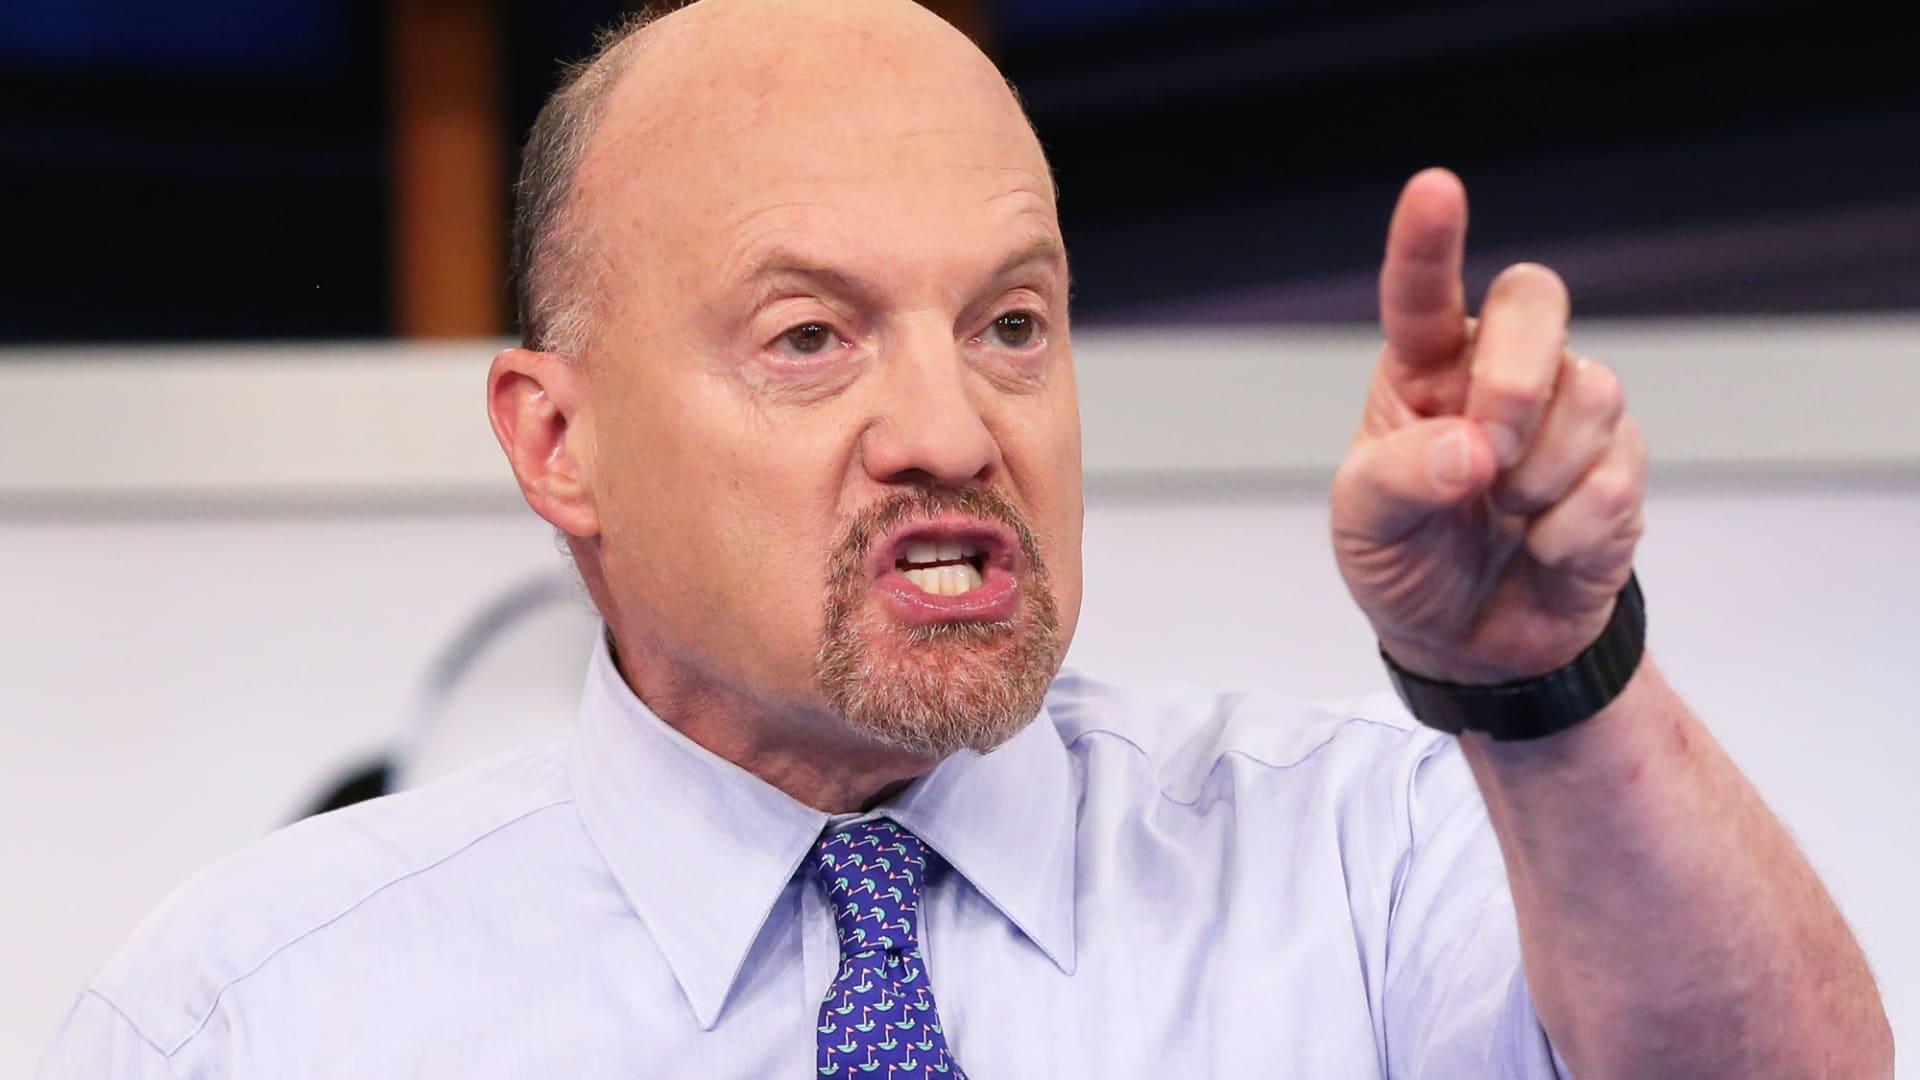 There’s more pain coming for investors who own buy now, pay later plays, Jim Cramer says